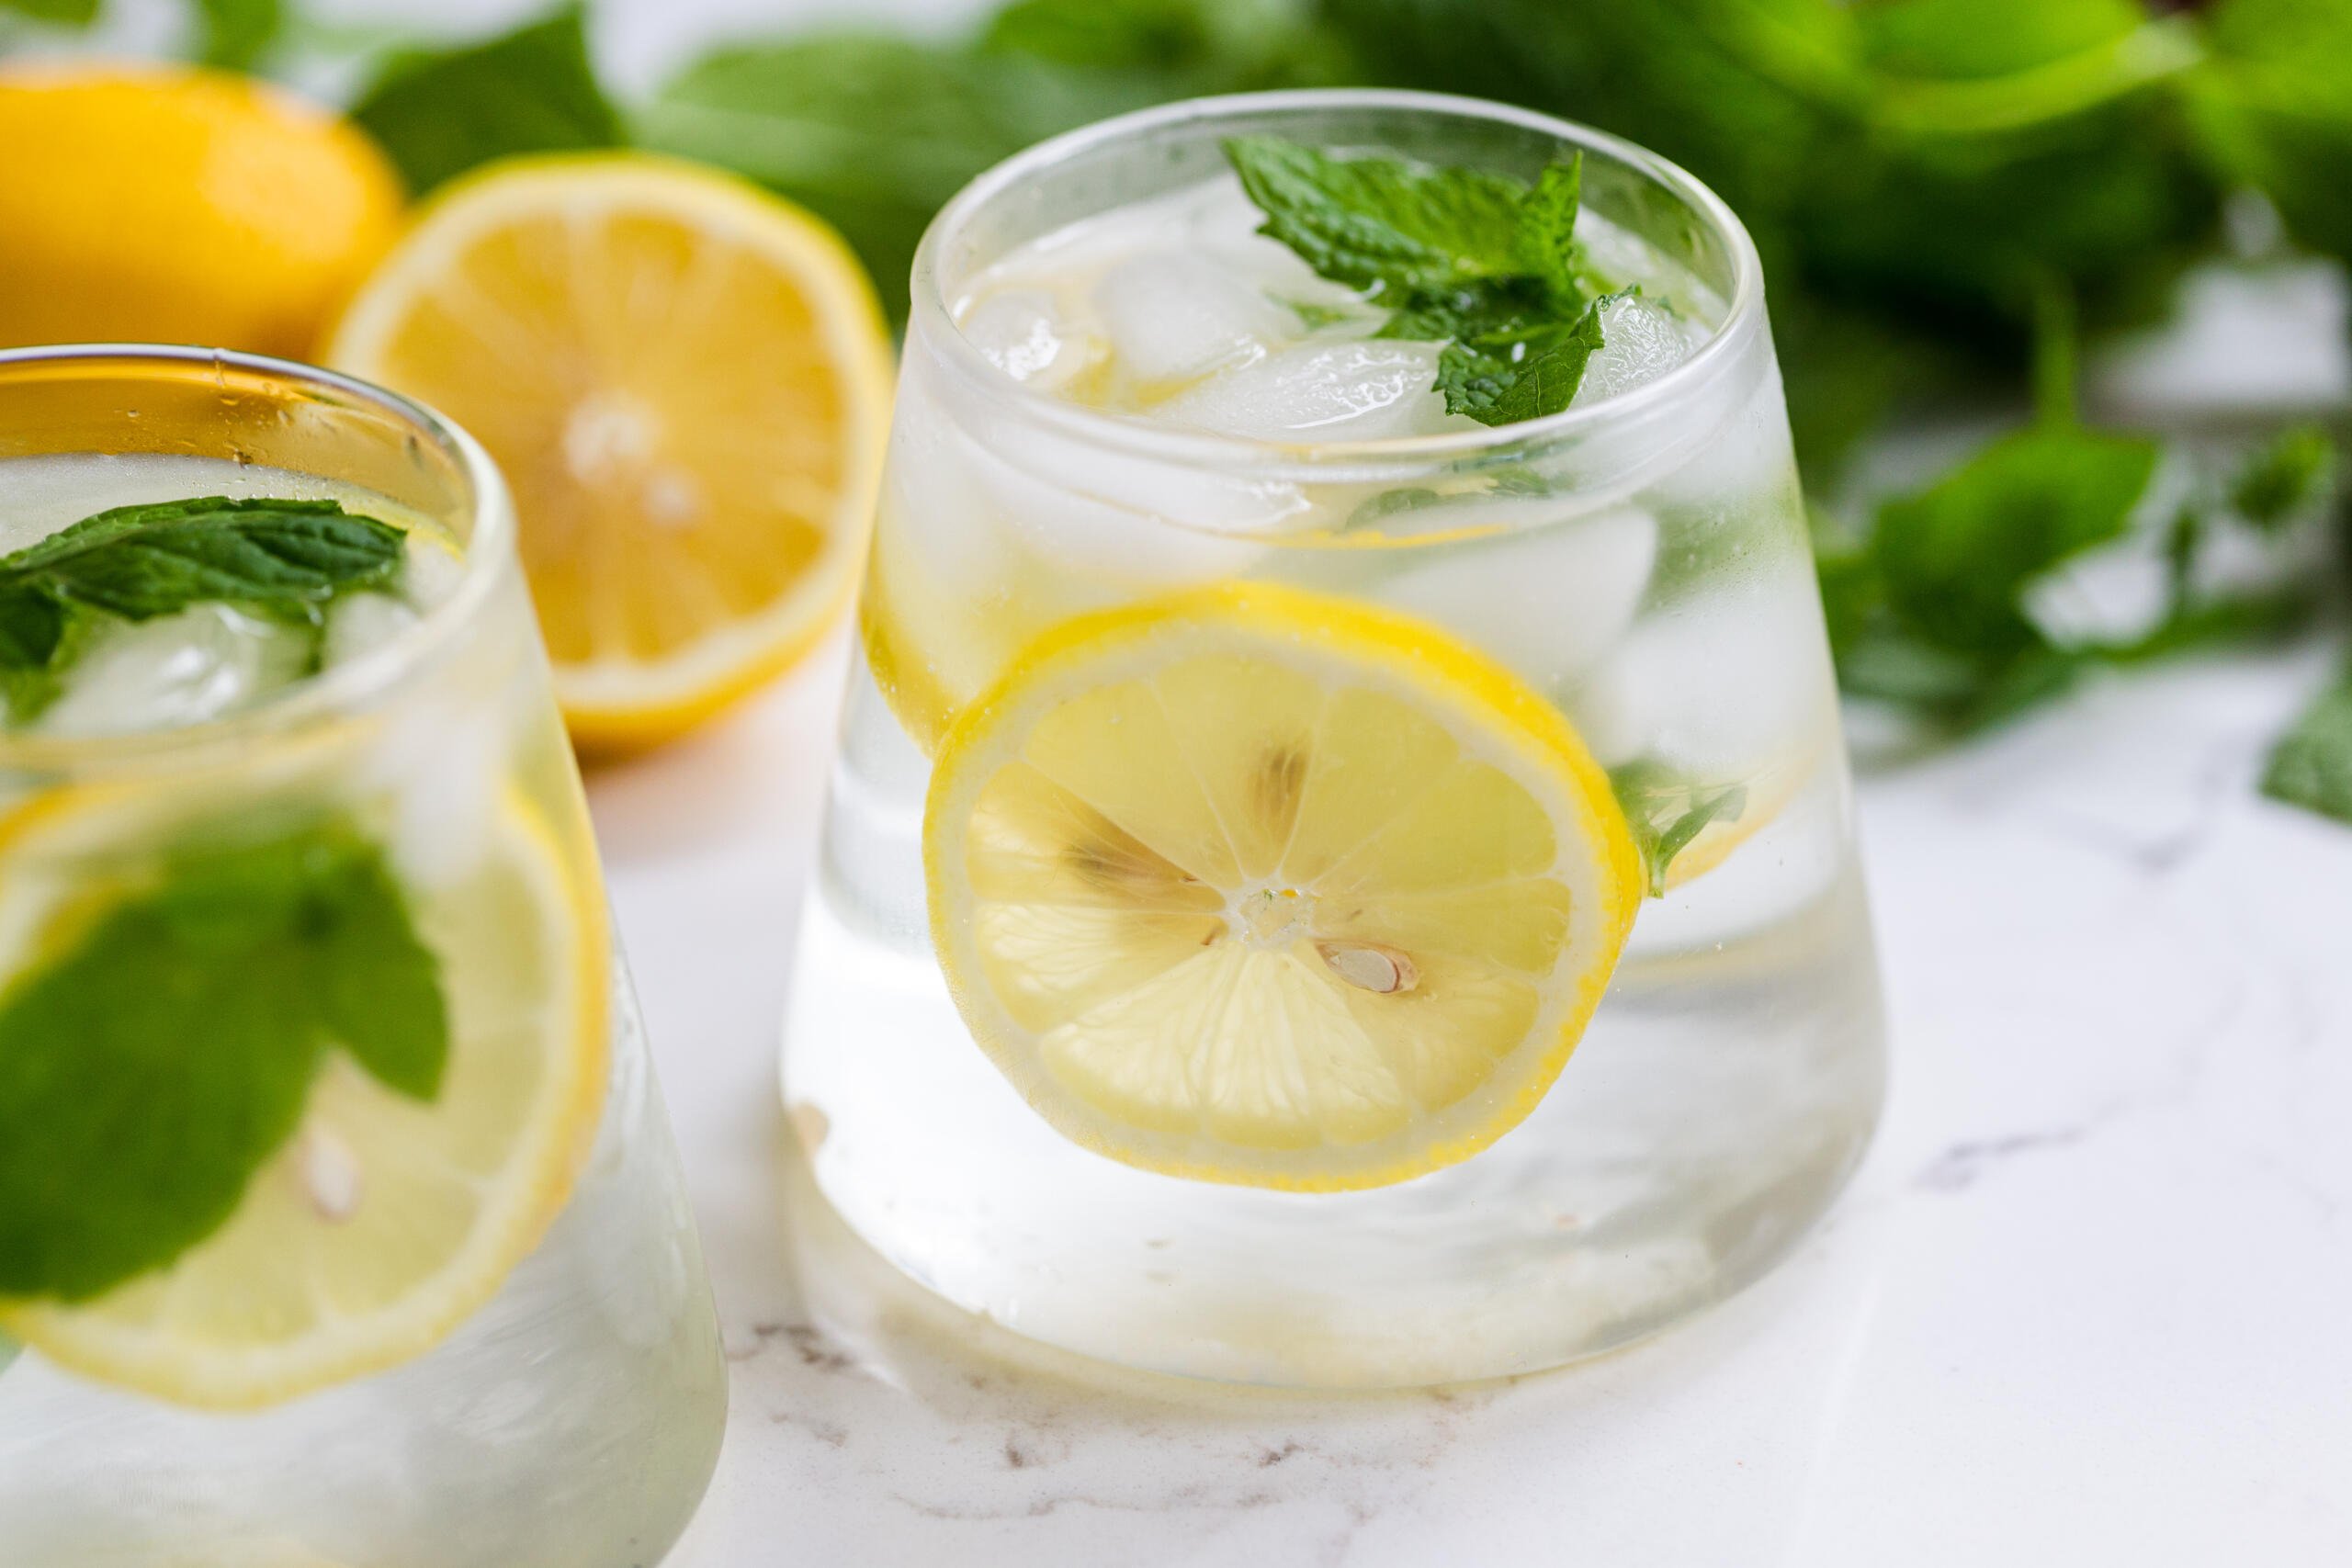 https://cdn.momsdish.com/wp-content/uploads/2020/07/Citrus-and-Mint-Infused-Water-07-scaled.jpg